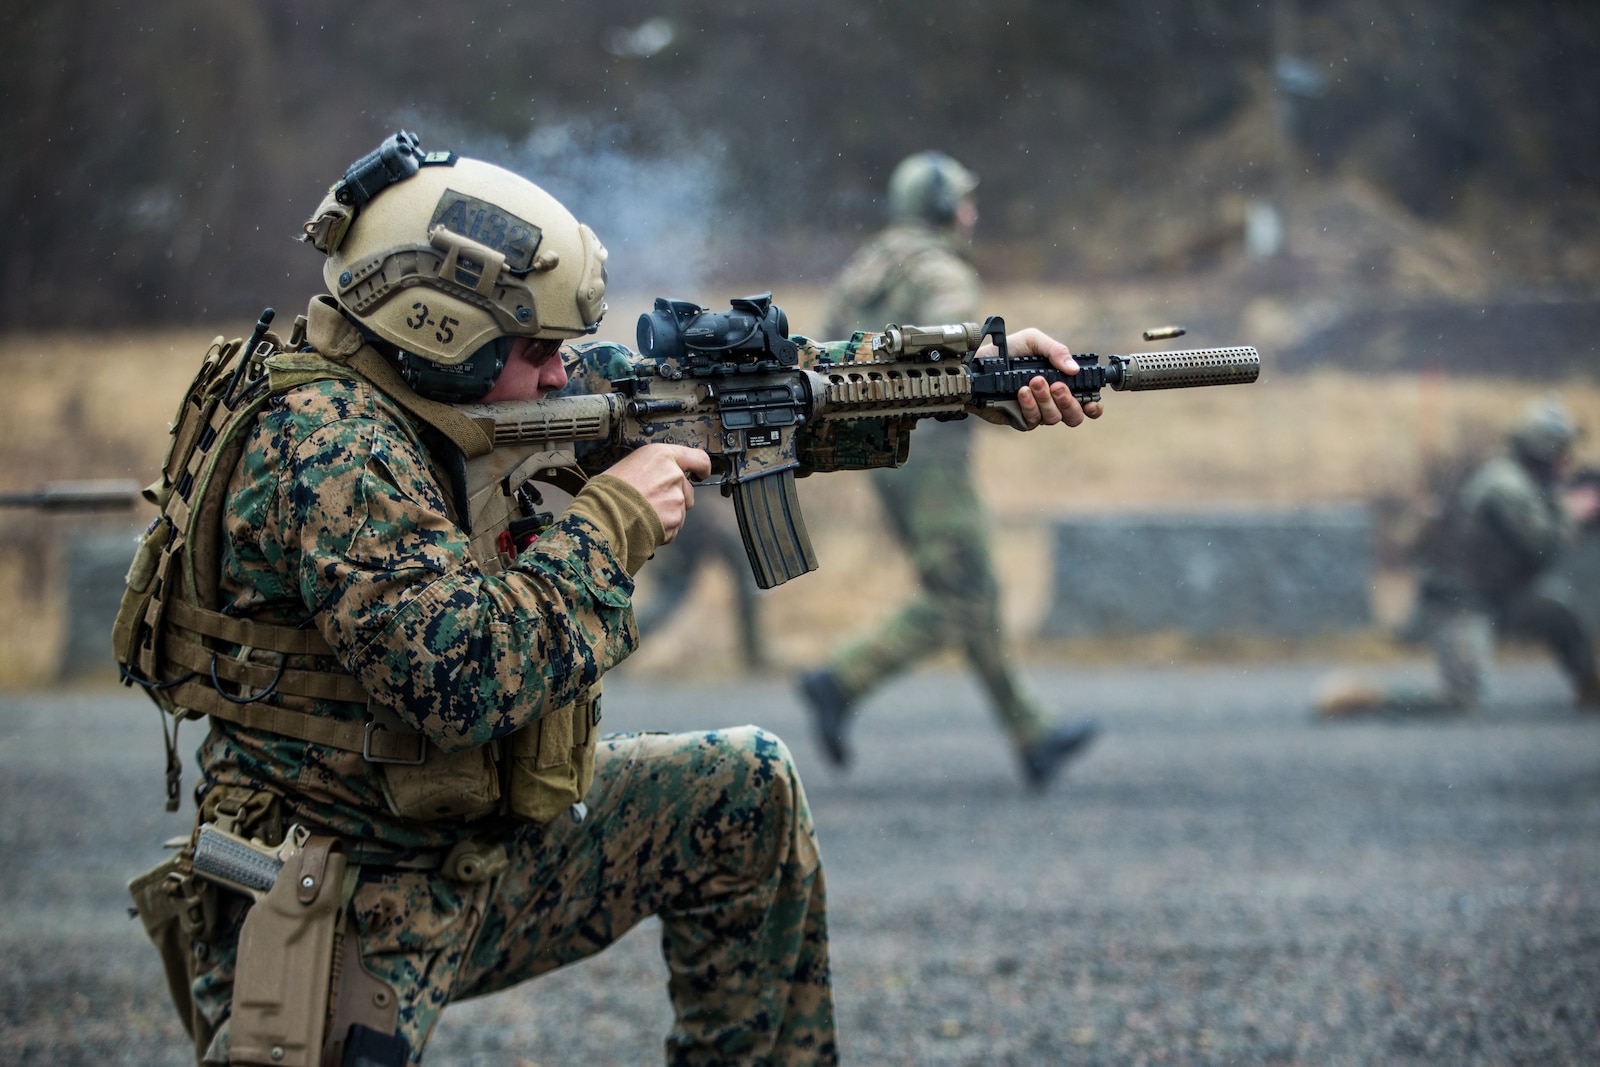 A U.S. Marine with 1st Reconnaissance Battalion, 1st Marine Division fires downrange amid an immediate action drill during exercise Platinum Ren at Fort Trondennes, Harstad, Norway, May 13, 2019.